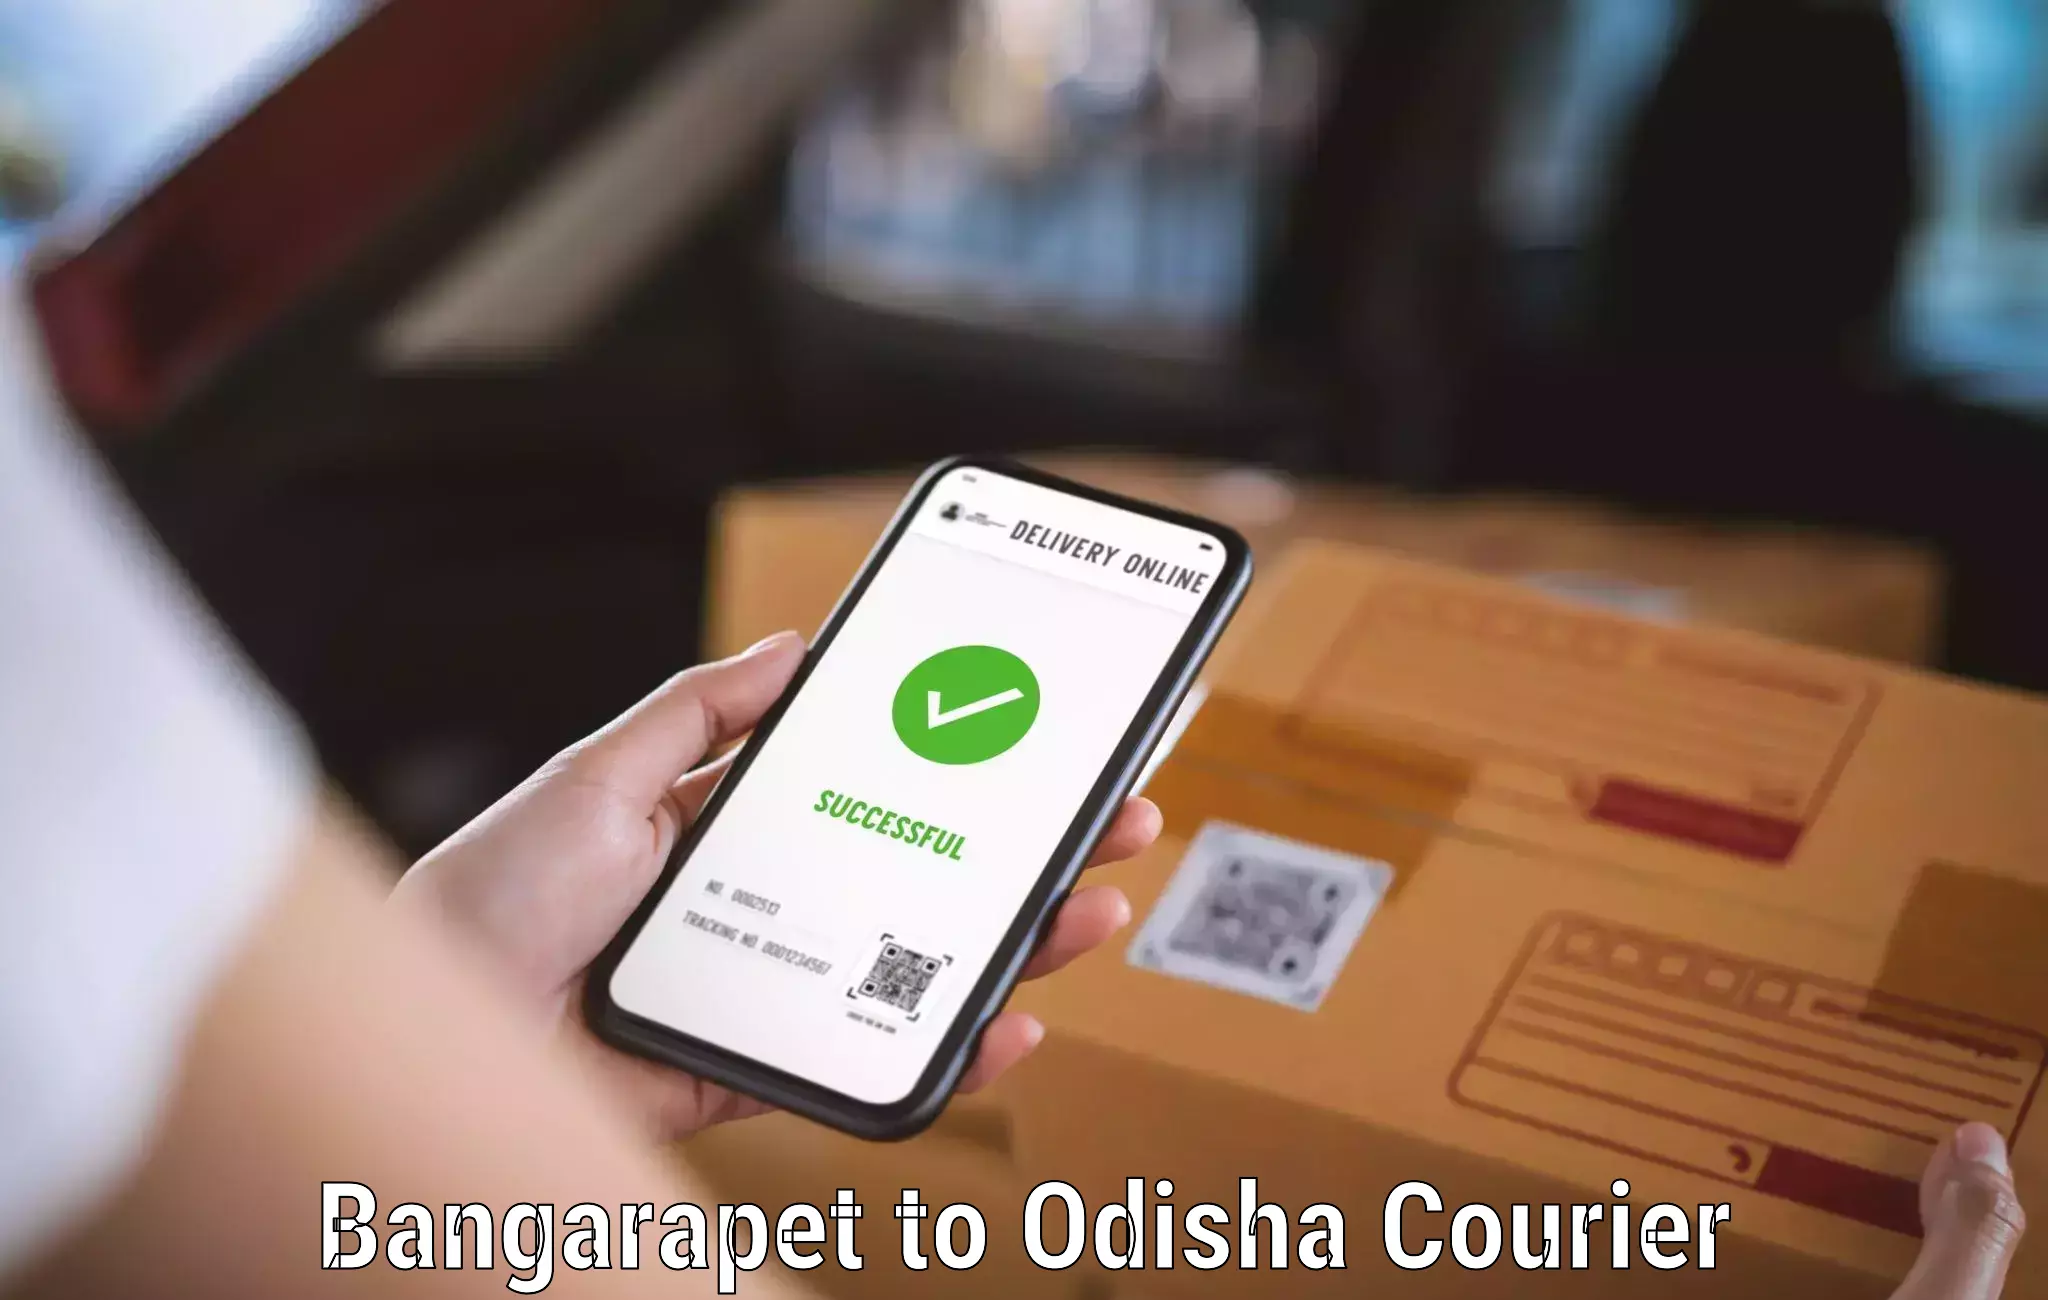 Package delivery network Bangarapet to Sohela